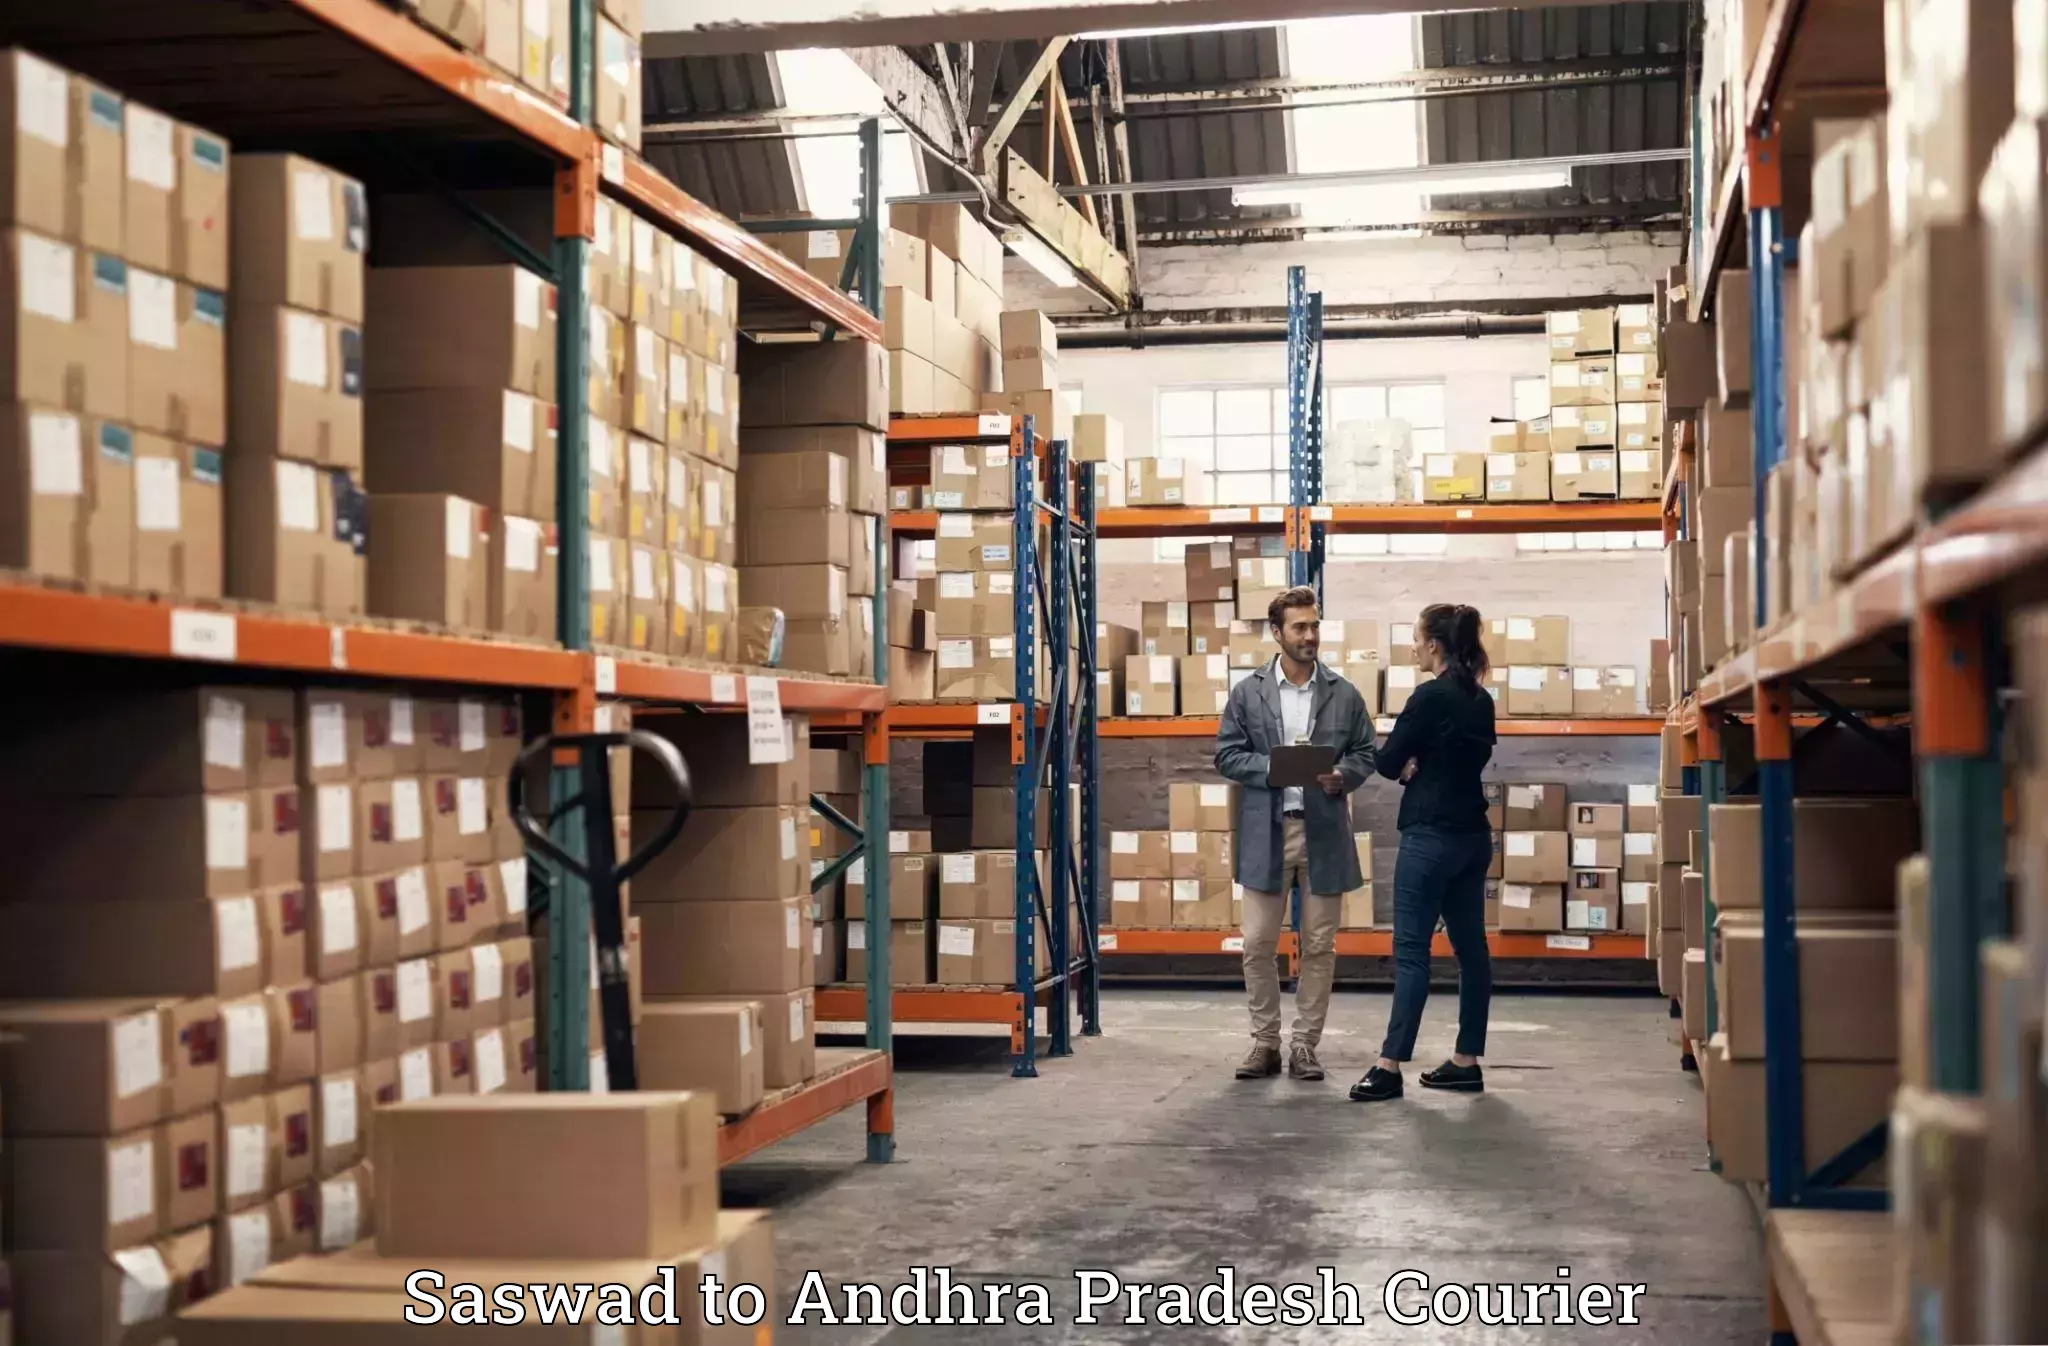 Personal effects shipping in Saswad to Visakhapatnam